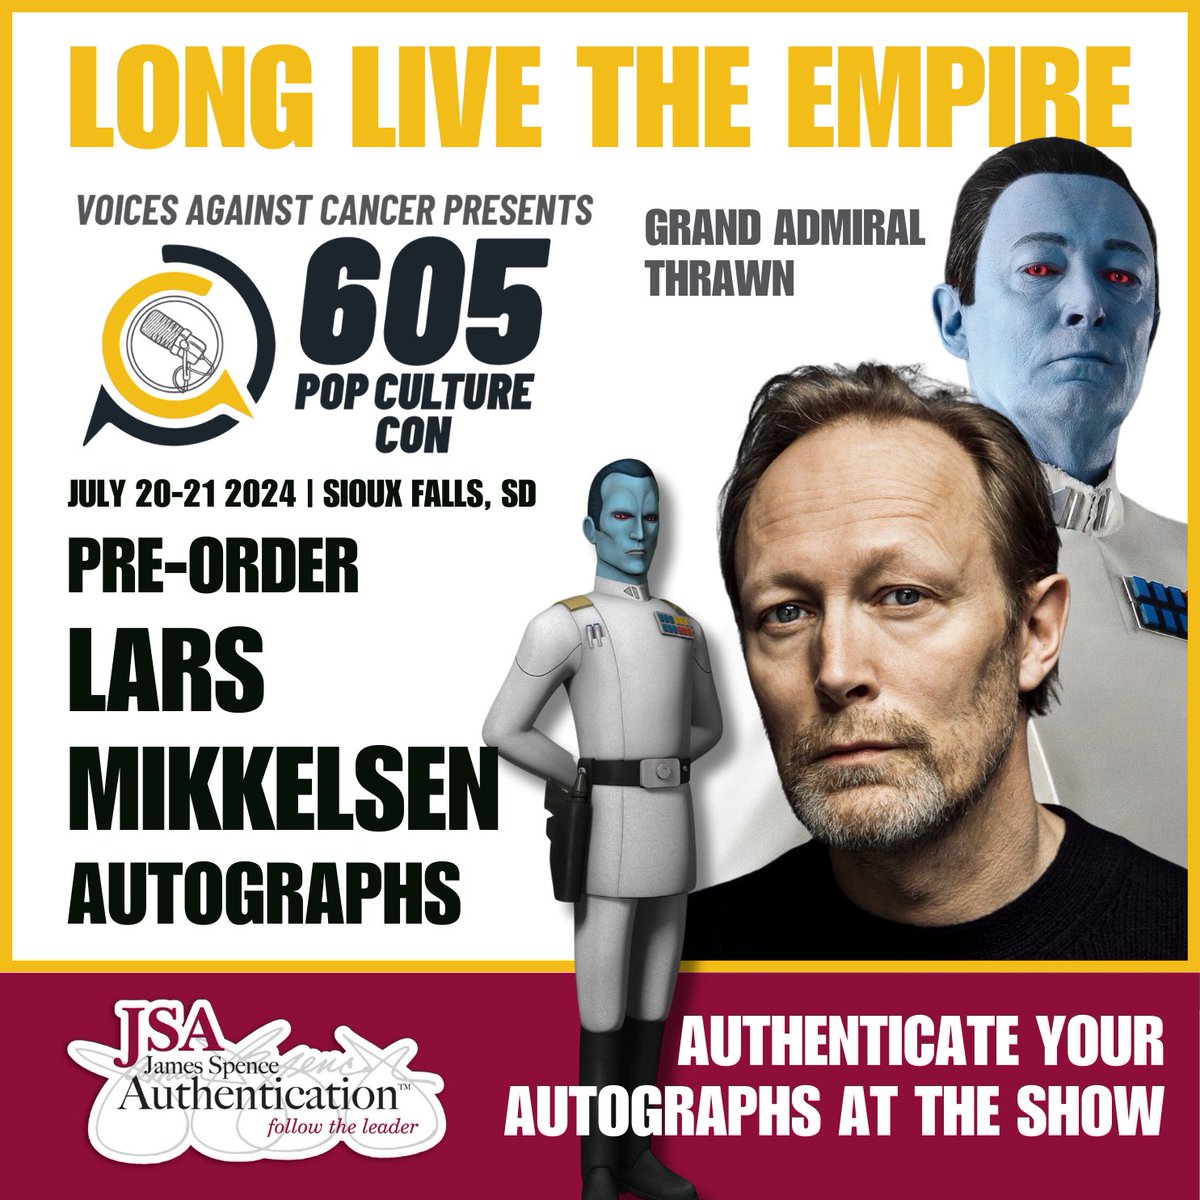 Get ahead of those rebel scum and purchase your Lars Mikkelsen autographs before @voicesvscancer #605popculturecon (July 20-21 2024) begins!

Visit bit.ly/VAC-Autographs to pre-order now!

Authenticate autographs obtained at the show with JSA for just $10/signature. This